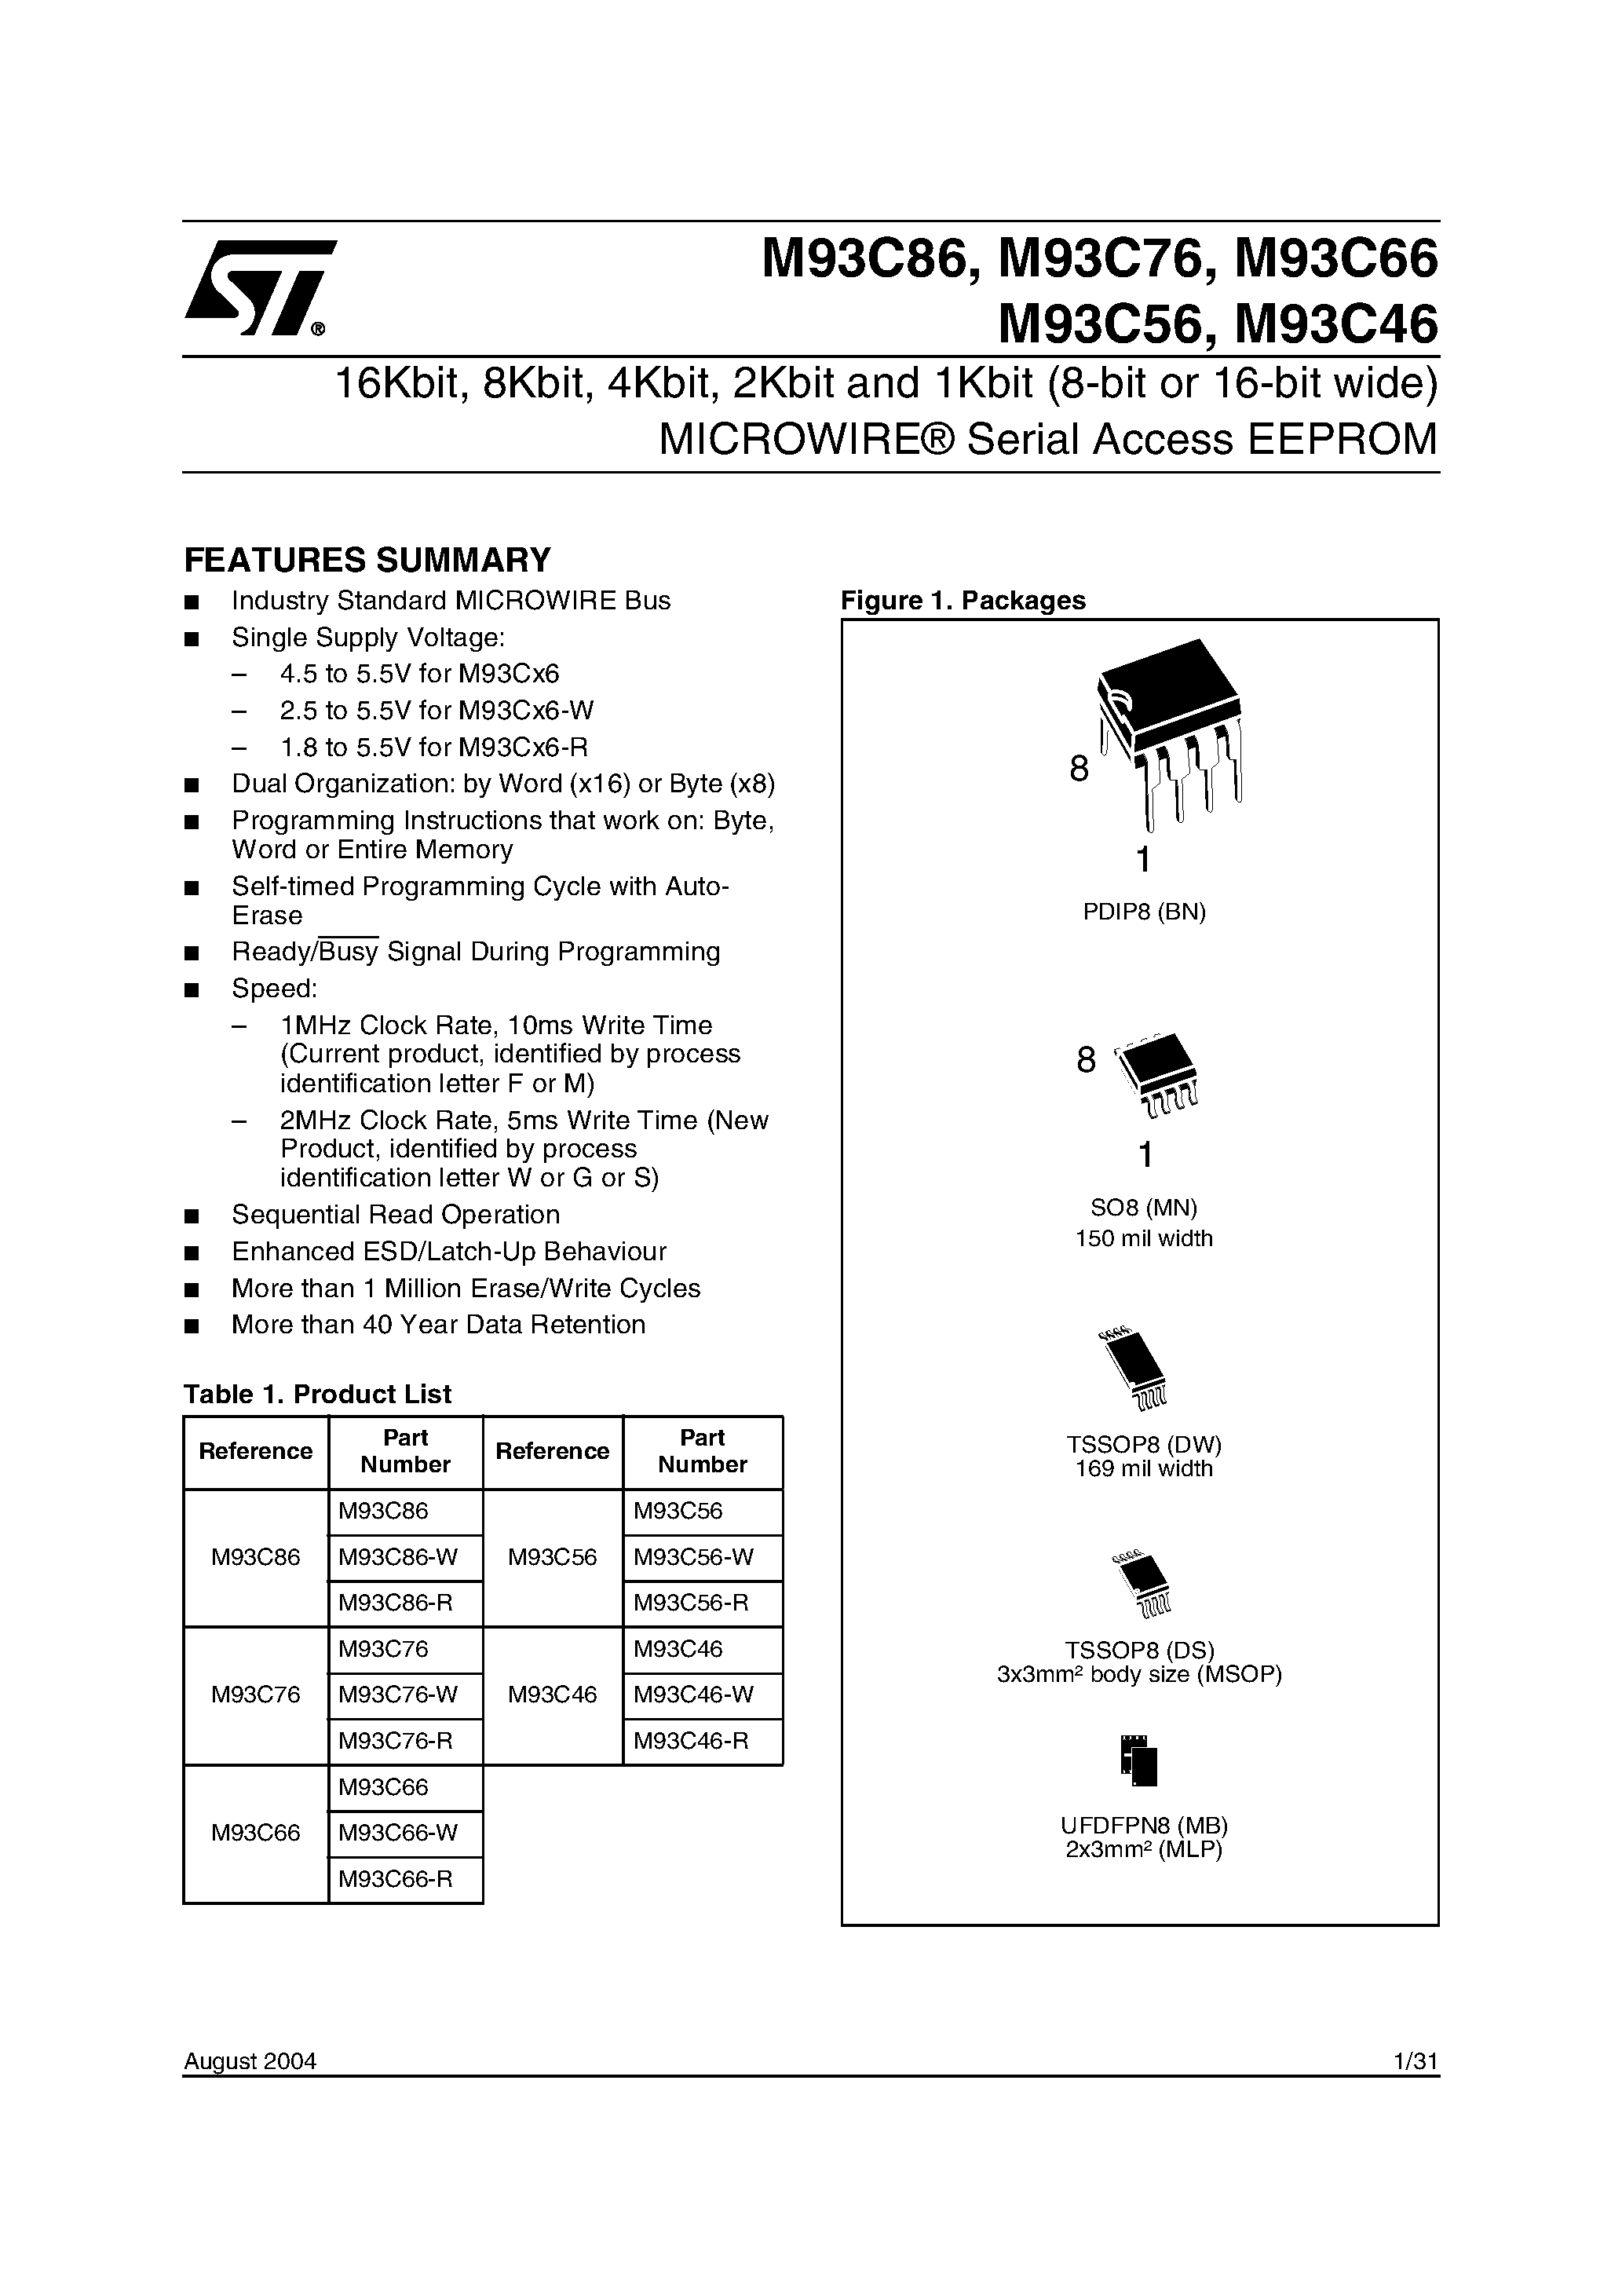 Datasheet M93C46 - 16Kbit / 8Kbit / 4Kbit / 2Kbit / 1Kbit and 256bit 8-bit or 16-bit wide page 1